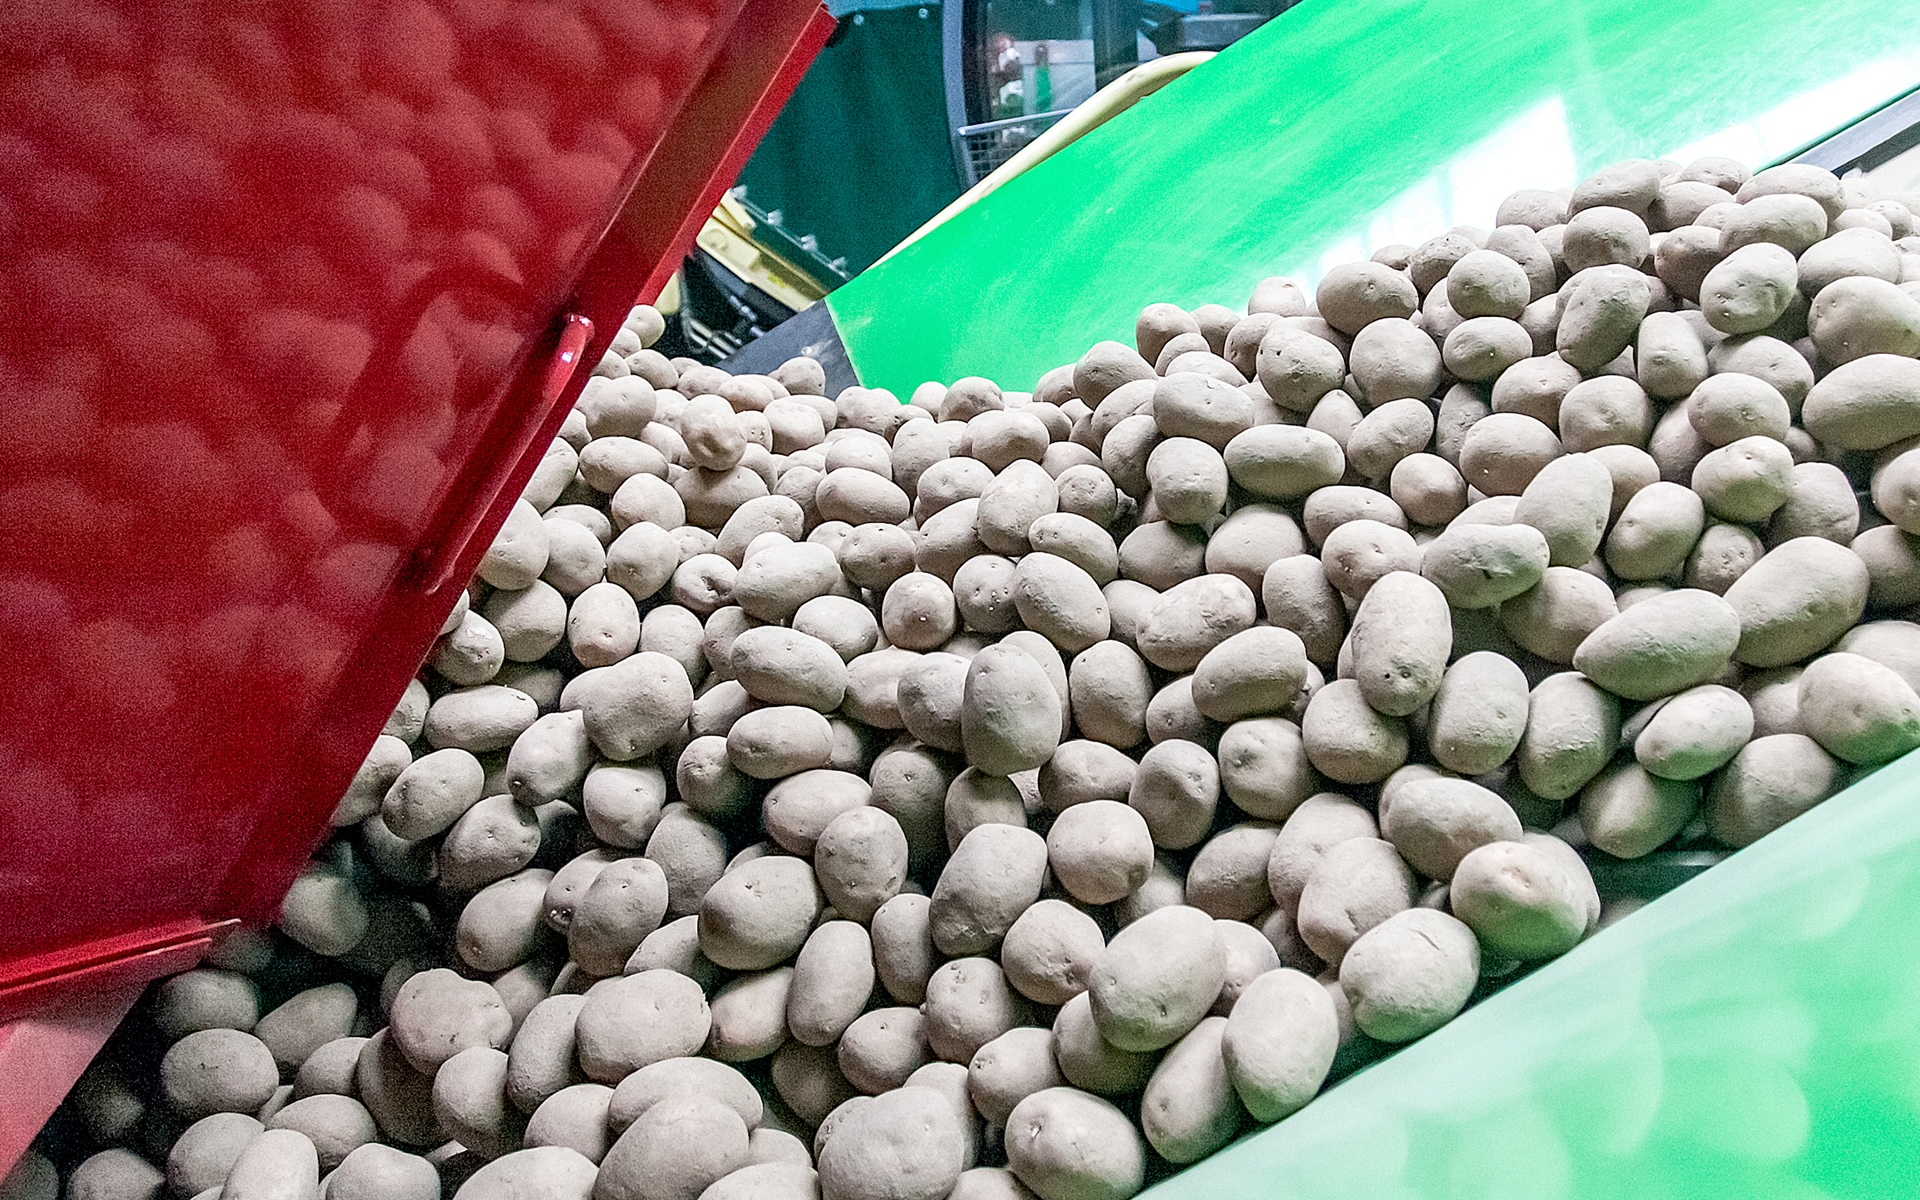 Potatoes being dumped out for storage